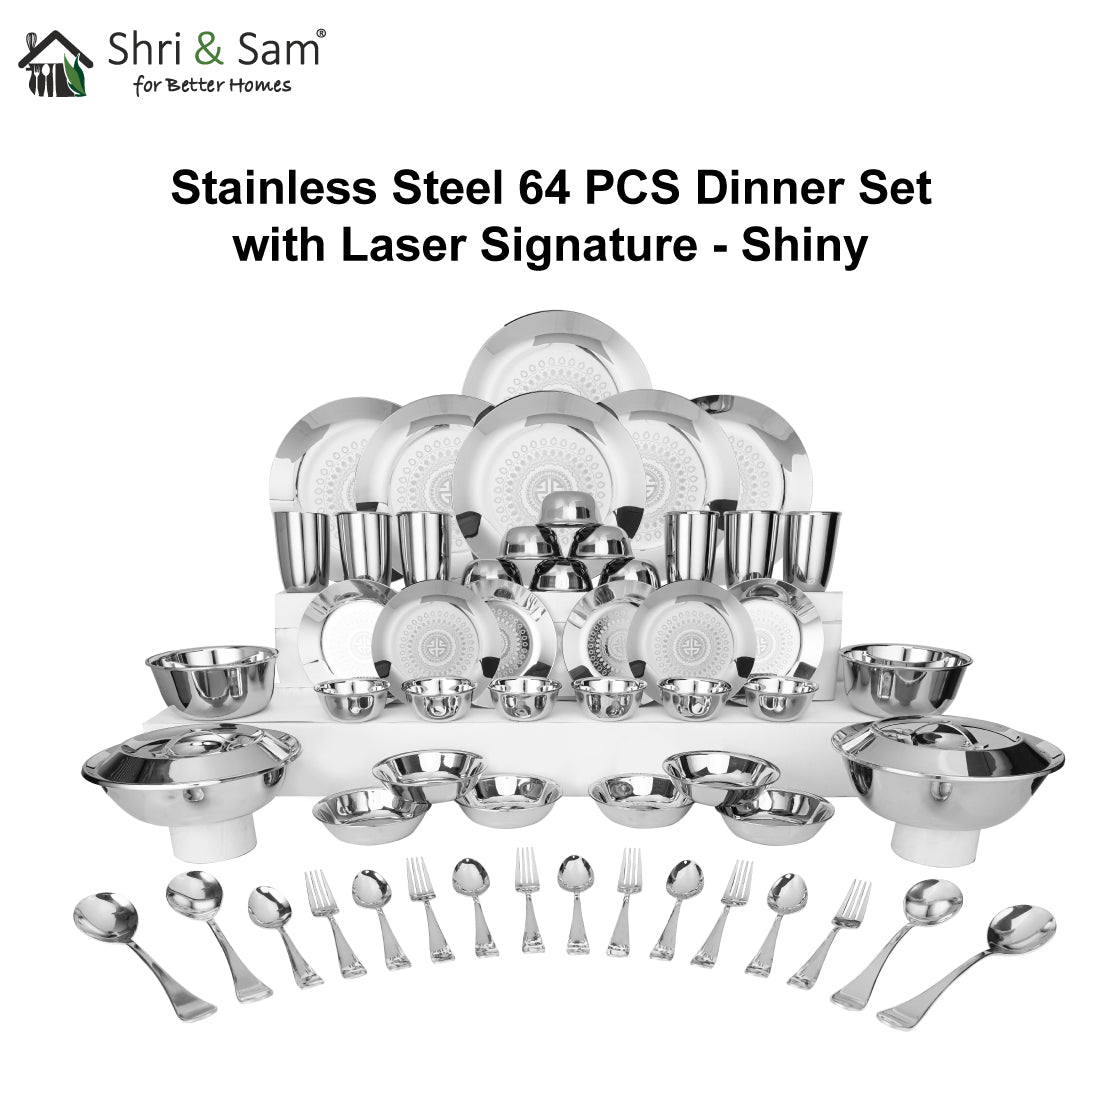 Stainless Steel 64 PCS Dinner Set (6 People) with Laser Signature - Shiny